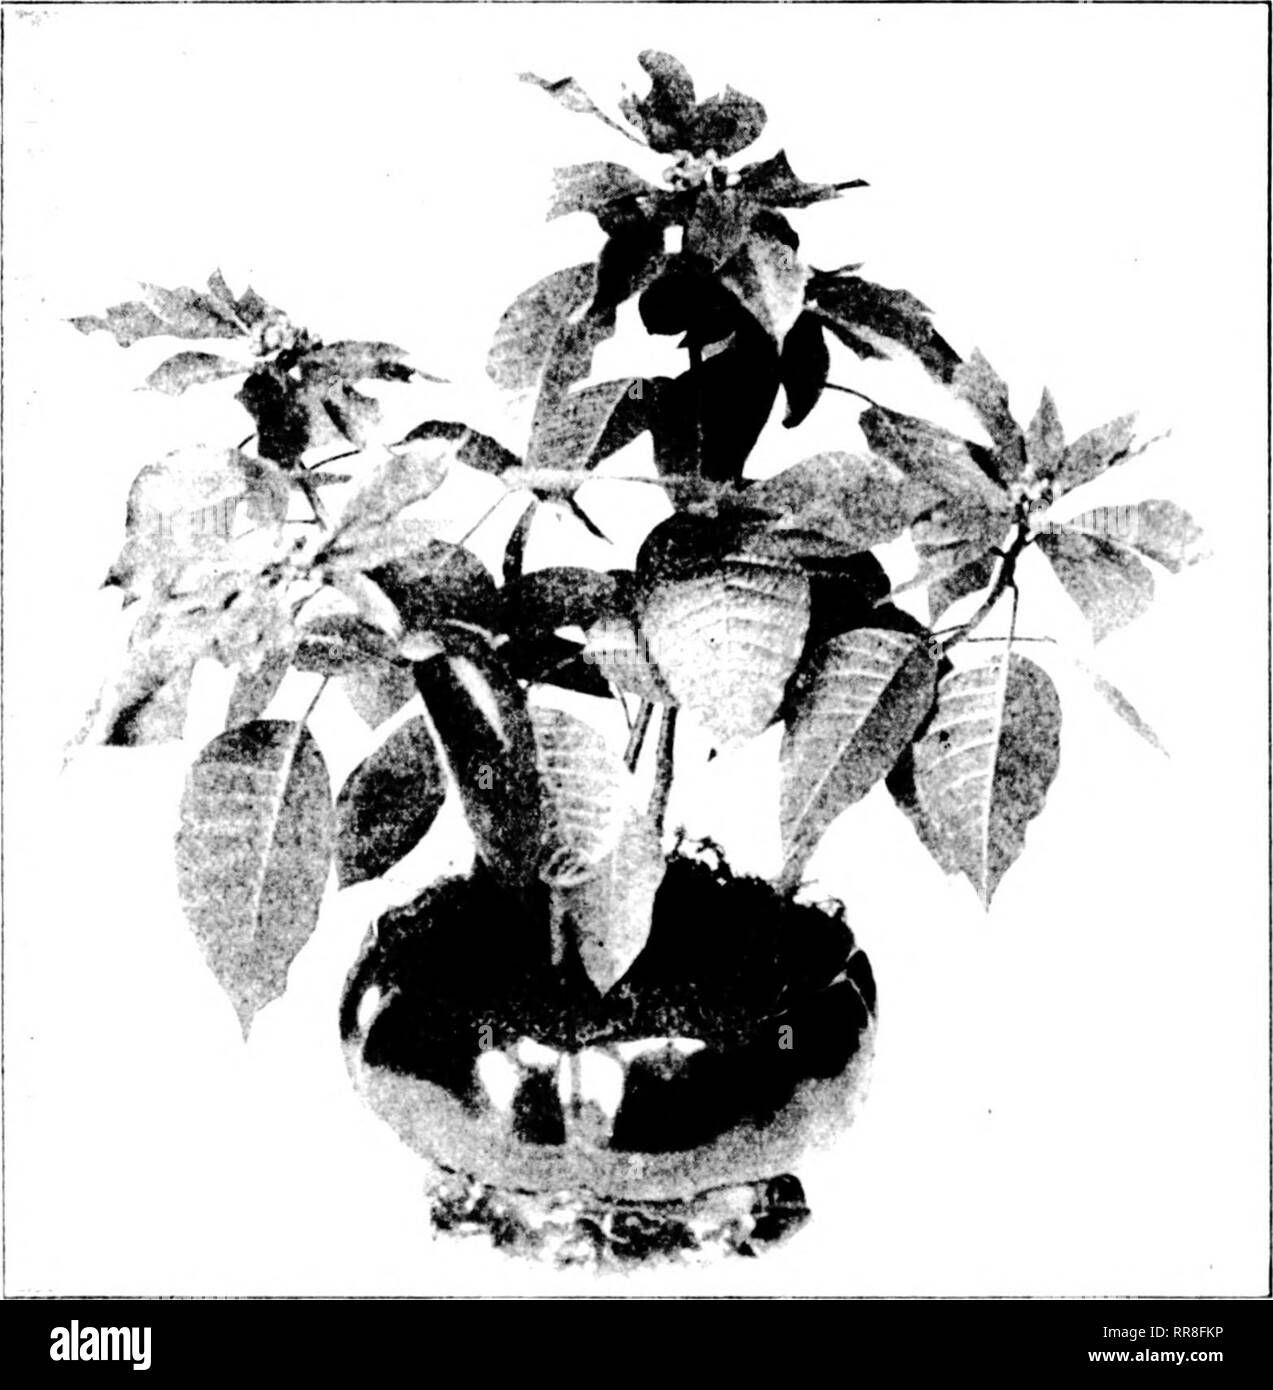 . Florists' review [microform]. Floriculture. GROWING POINSETTIAS For Commercial Purposes. 'I'lif iKiiiisft I i;i is bot.'iiiic-.illv kiiowu as i'vUplKiiliiH imiclici lima .iihI ]&gt;ny lariy as I he Mexican llaiiir lea I'; tin' latter iiaiue is deriNcil Iruiii tin' t'ai-t tliat llie [ilaiit is a iiatisc el' Mexico and liom the tianiiny red hiaits wiiiidi it iir(]diu-i's. The jioinsi'tl ia is the iiojui lar (.&quot;hristnjas jdanl, because its color is so syuiliolii- ol tho j,'oo(l I'eidincr and cheer which pervade the at niesjdiere at &quot;S'liletide. 'I'lie plant is net difliciilt to i;re Stock Photo